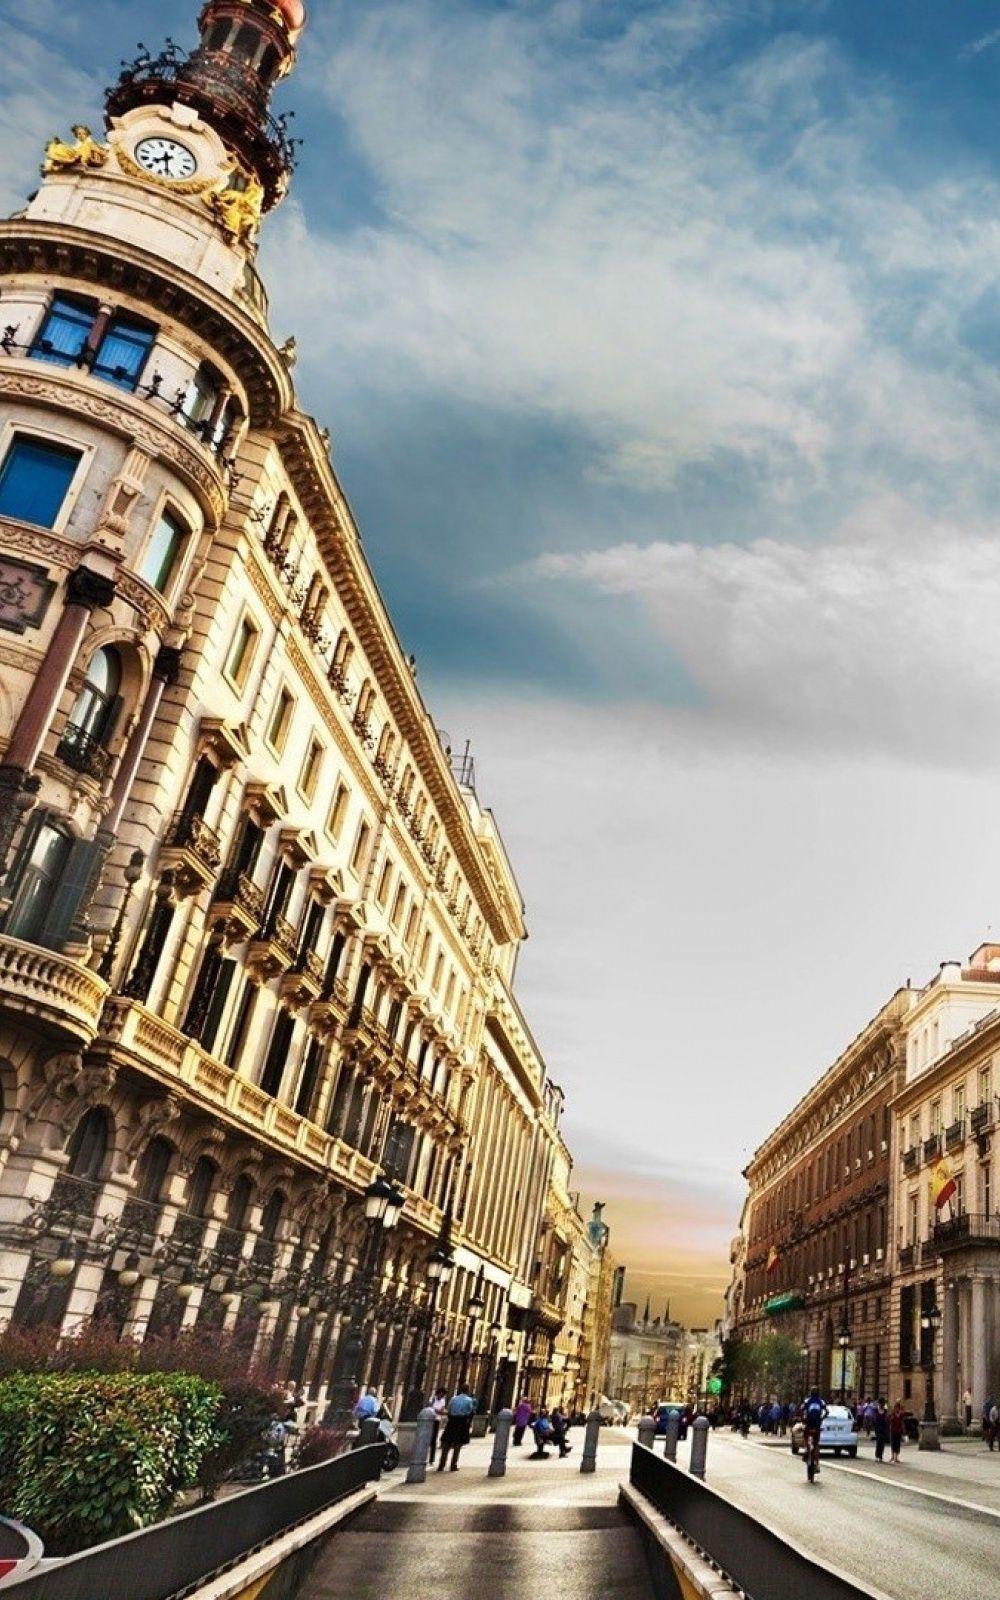 Barcelona HD Street View Android Wallpaper free download